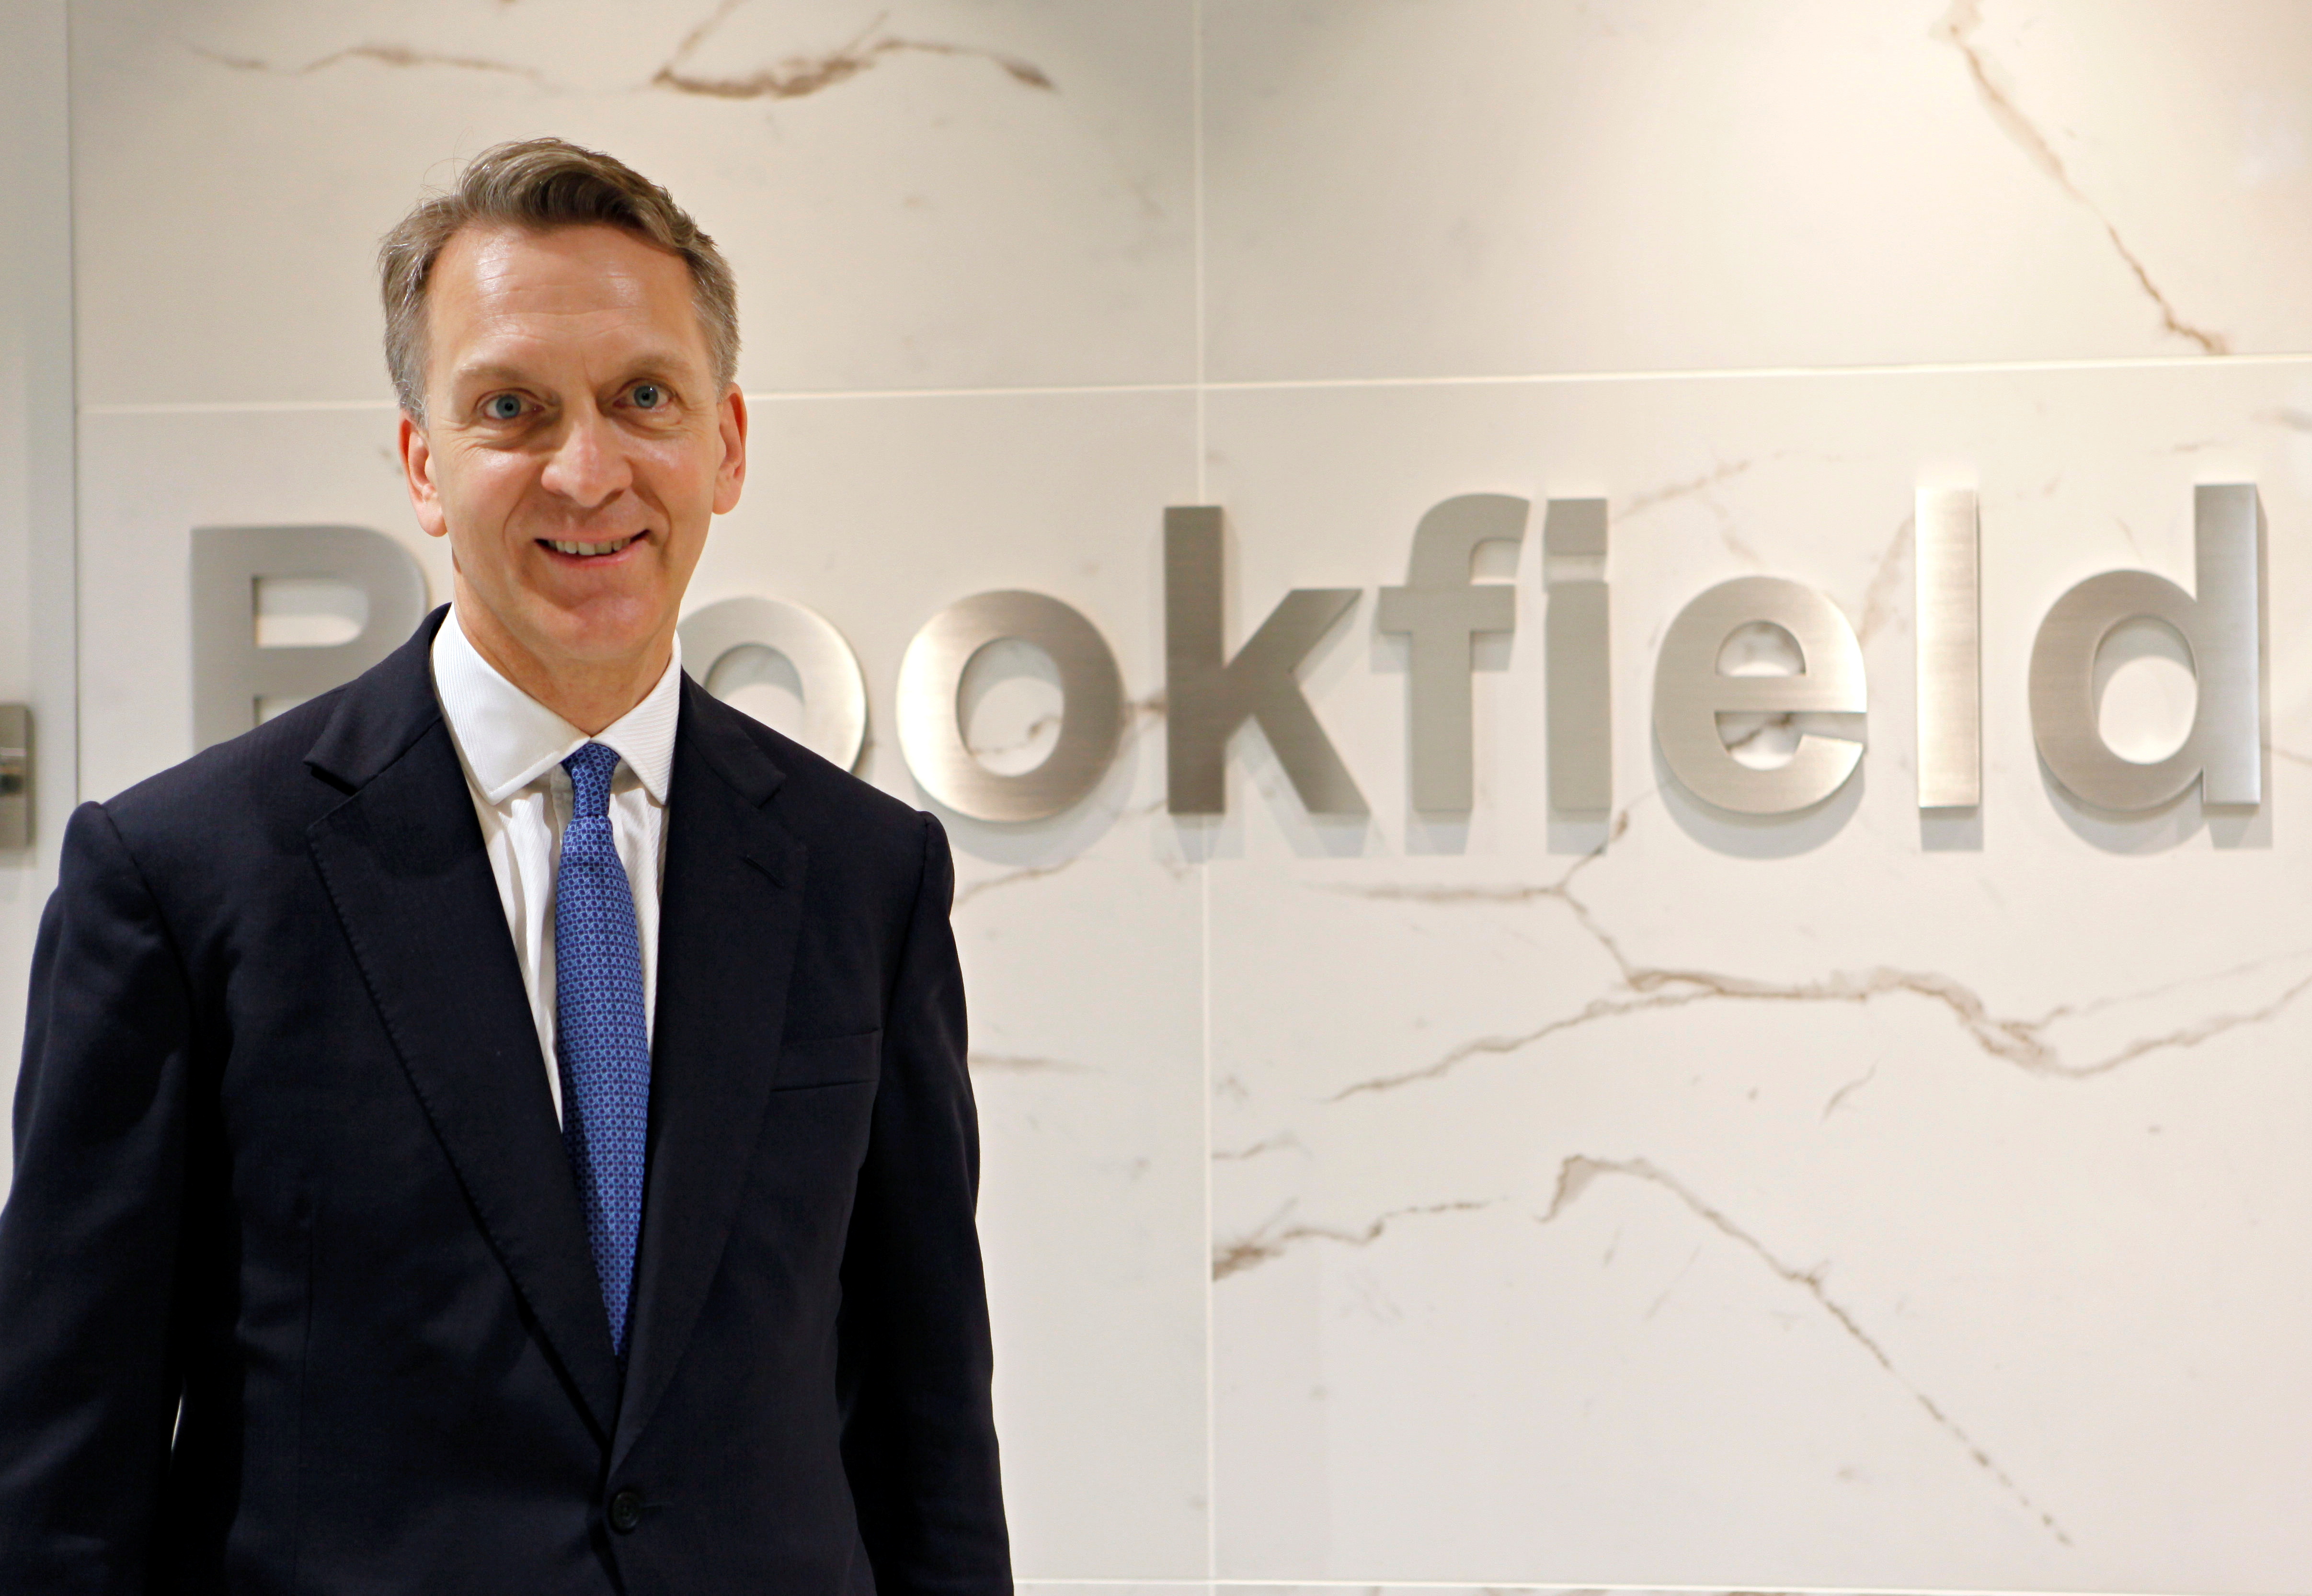 Bruce Flatt, CEO of Brookfield Asset Management, poses in front of the company's logo in Tokyo